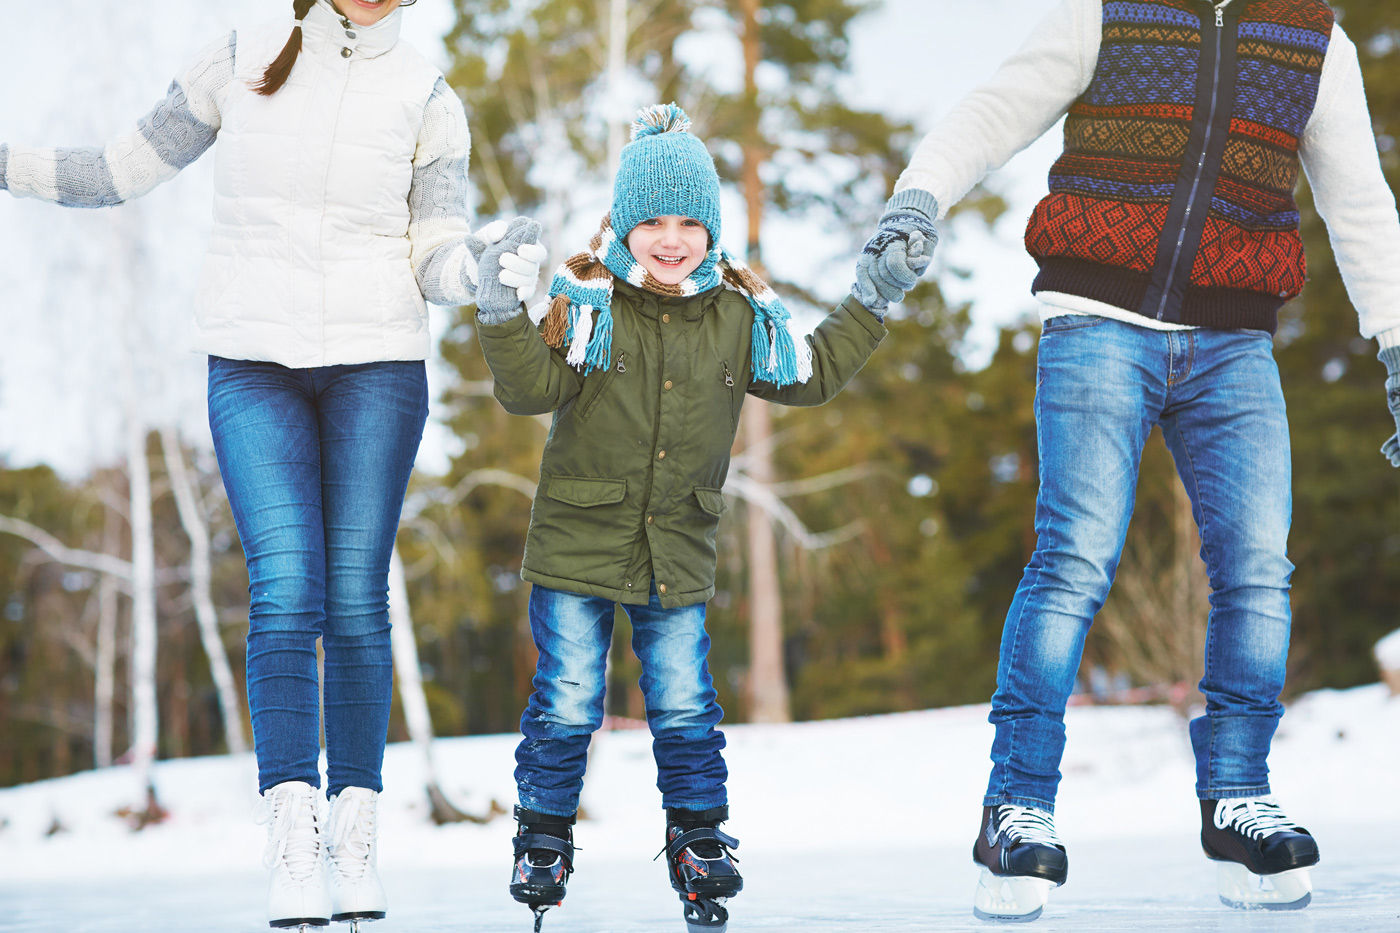 Go for a skate on Family Day at Cameco Meewasin Skating Rink, a short drive from our Saskatoon airport hotel.